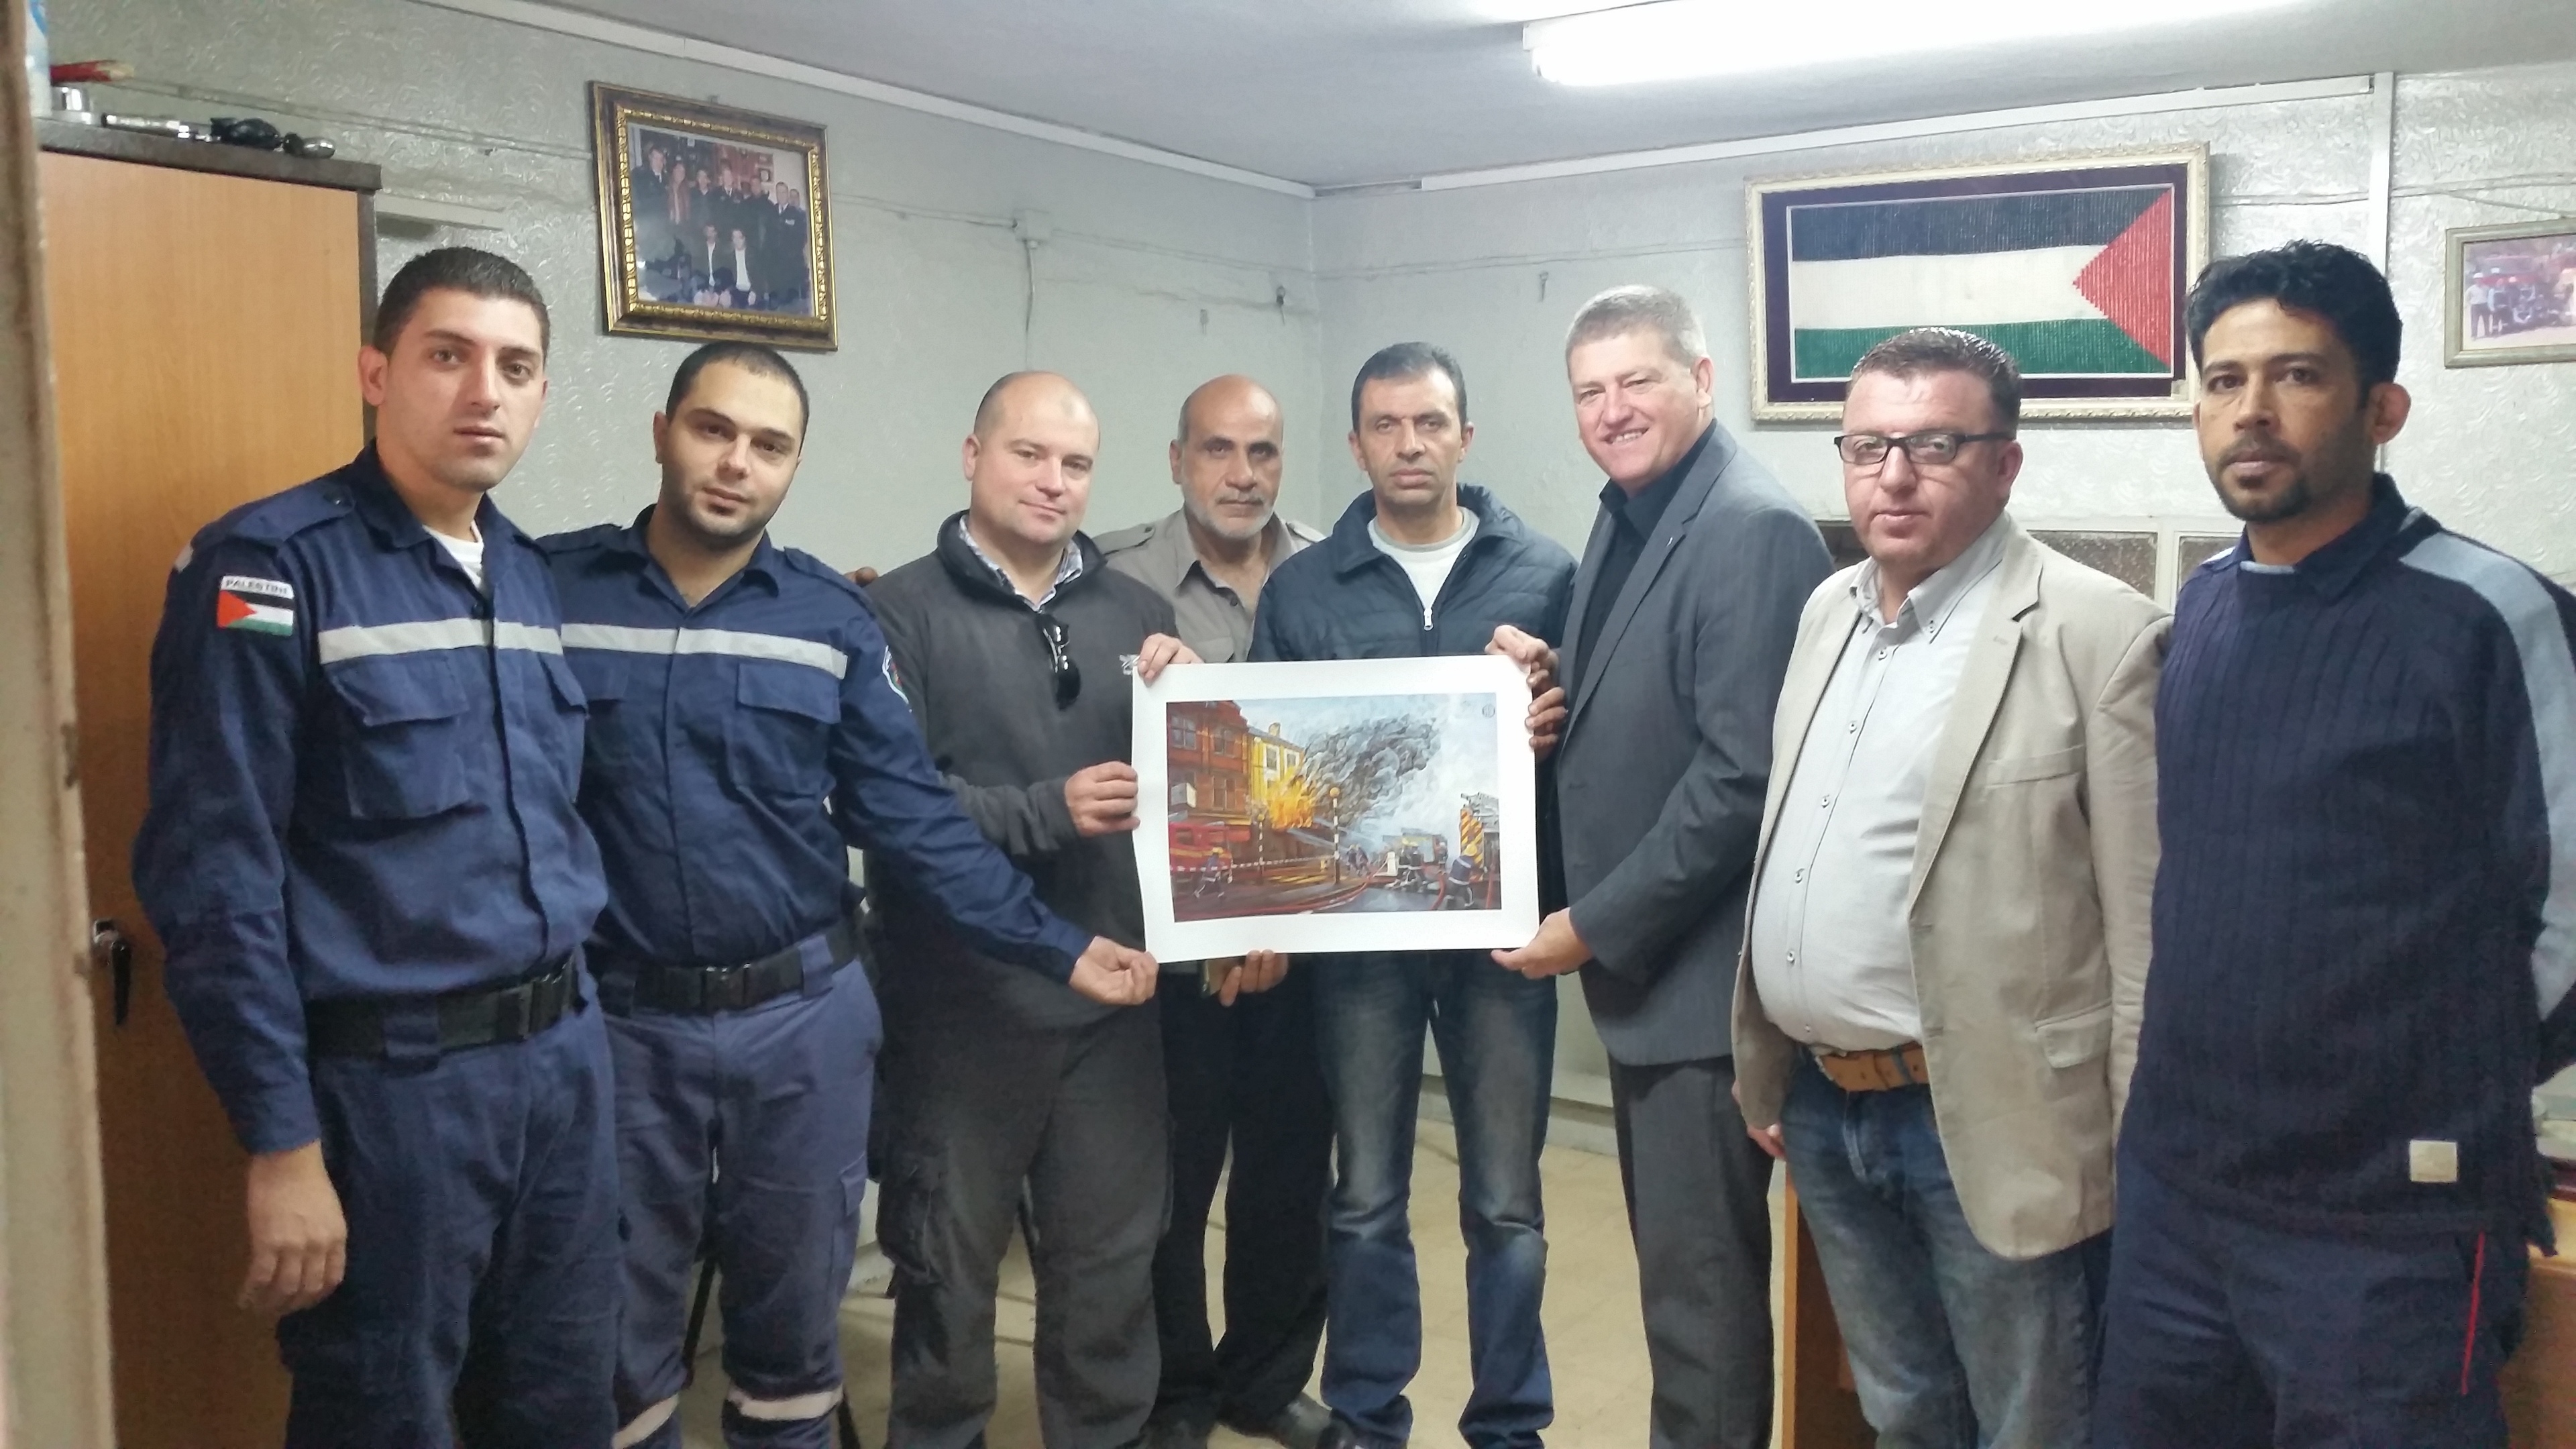 Jim Malone with local firefighters on a previous trip to Palestine.